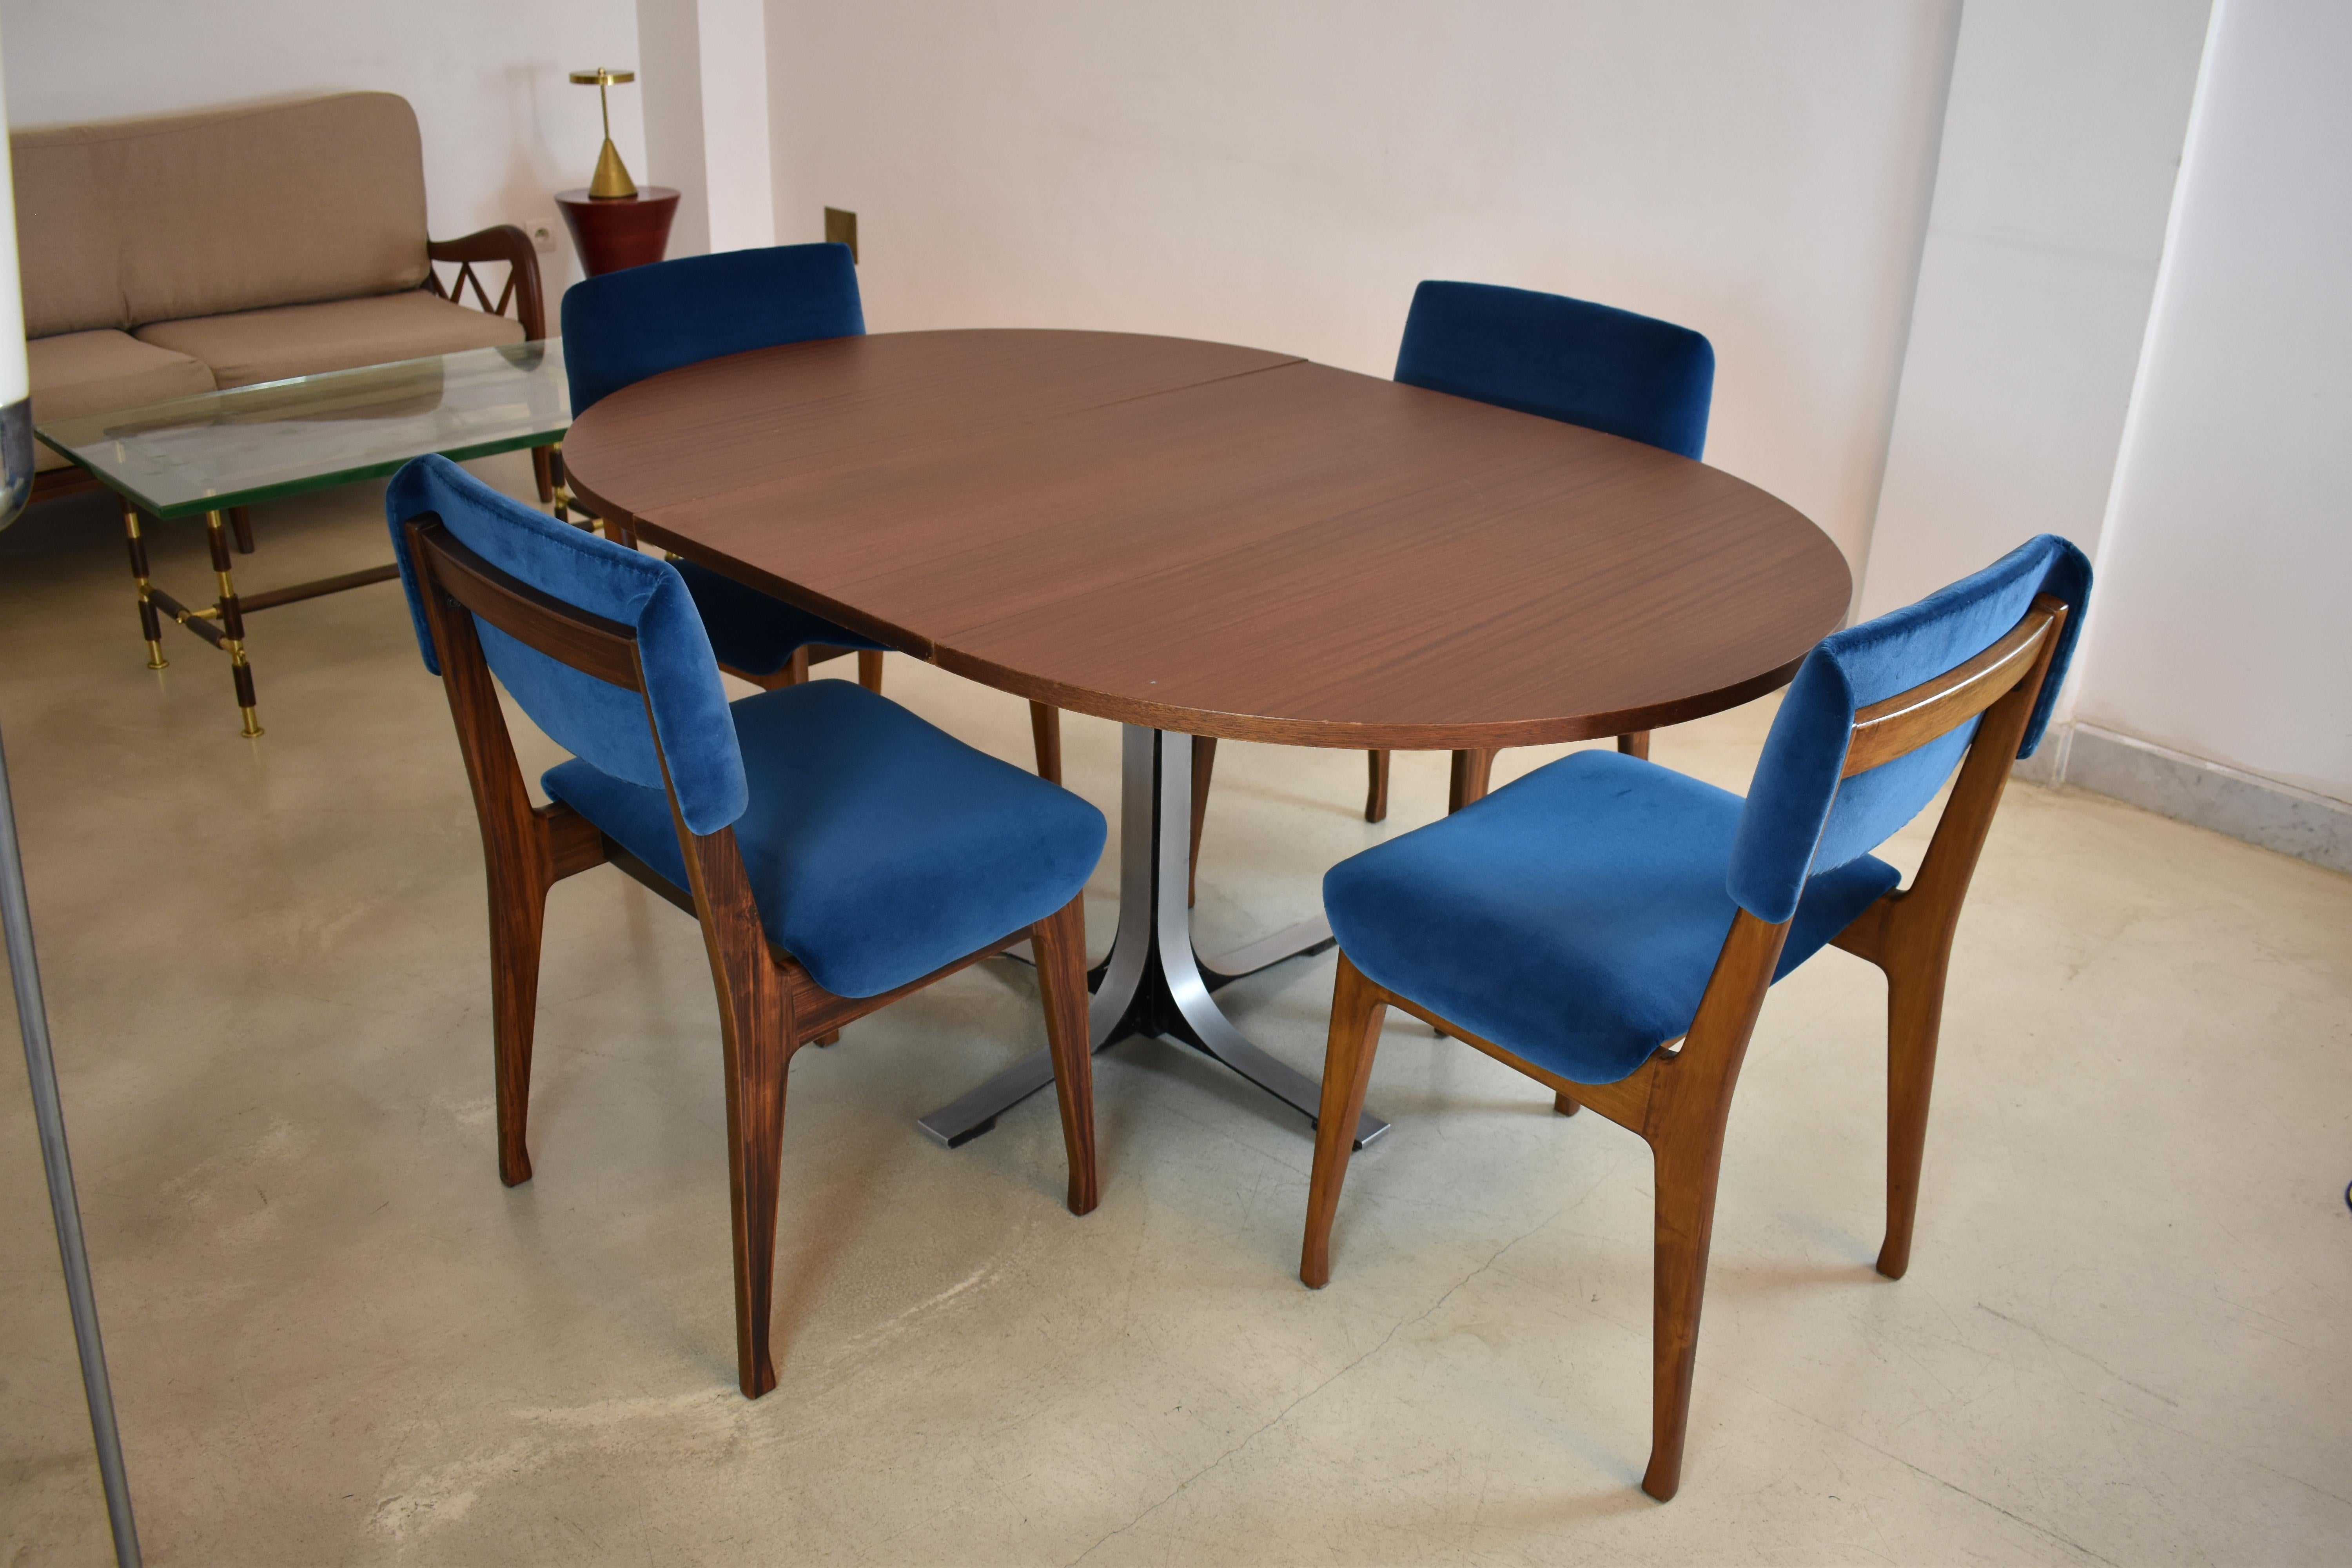 Italian Ico Parisi Wooden Dining Chairs, Set of Four, 1950s-60s For Sale 9